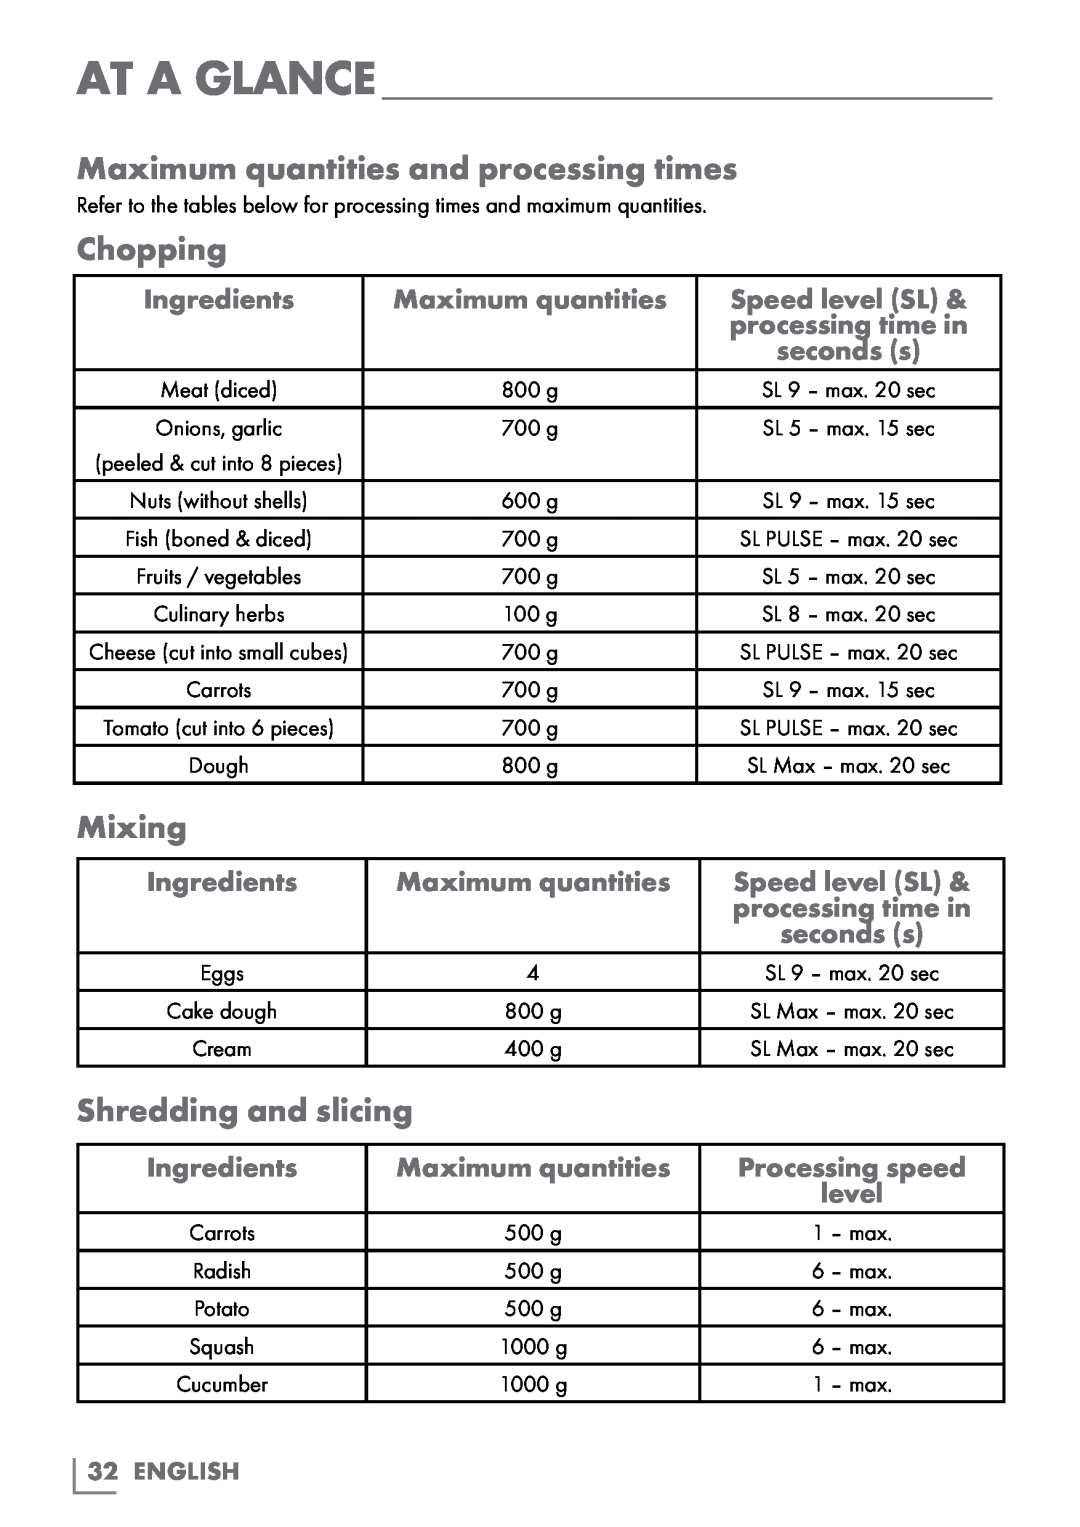 Grundig UM 9050 manual Maximum quantities and processing times, Chopping, Mixing, Shredding and slicing, At A Glance 